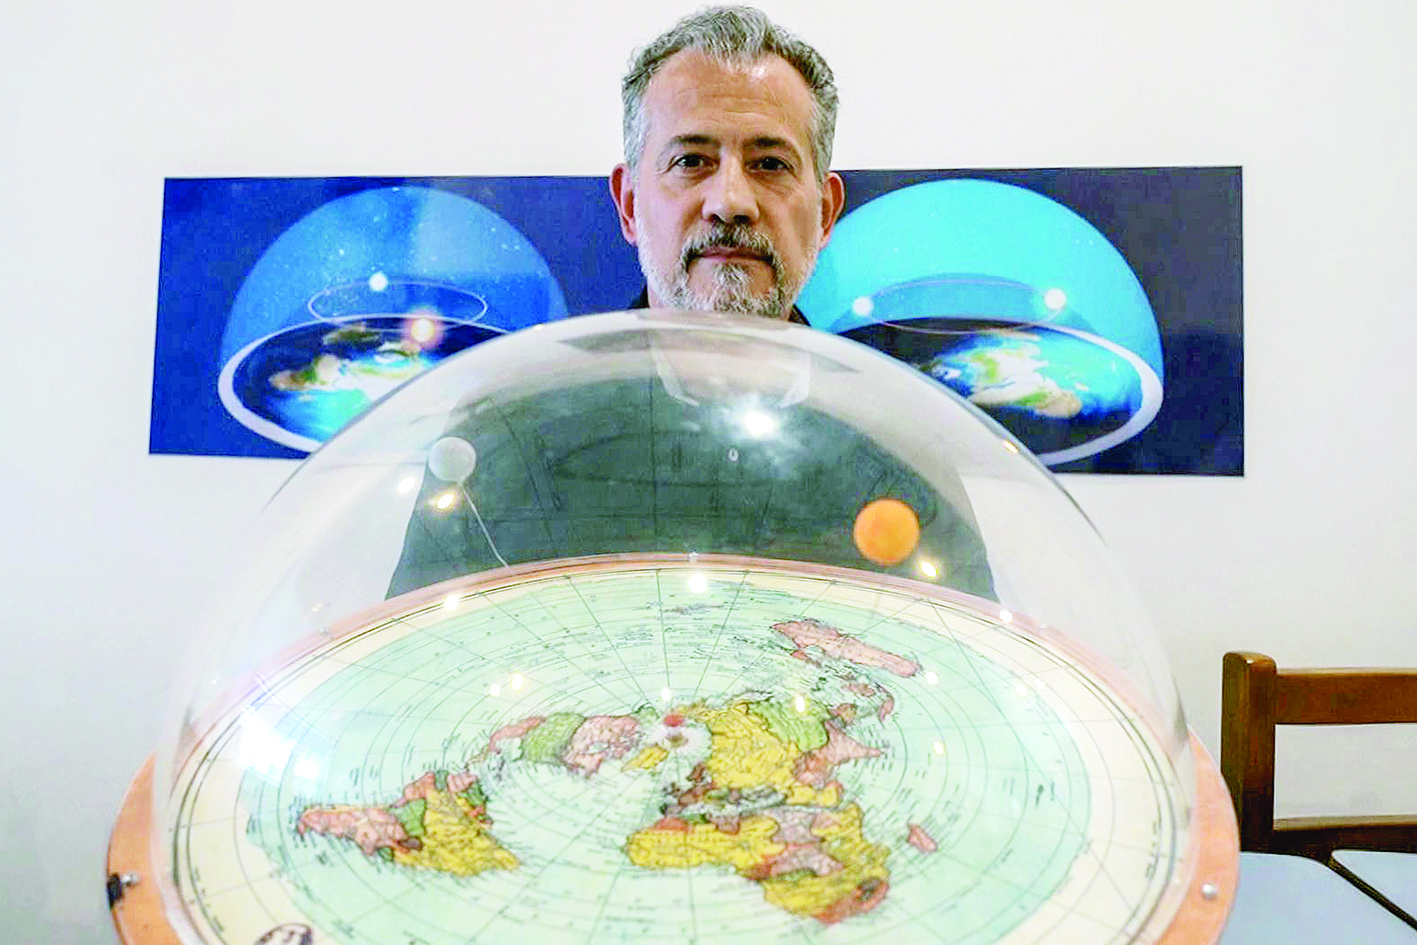 Brazilian self-avowed flat-Earth conspiracy theorist Anderson Neves holds a model of the flat earth surrounded by a dome during an interview with AFP in Sao Paulo, Brazil, on February 13, 2020. - Eleven million people in Brazil, 7% of its population, believe that the Earth is flat, according to Datafolha polling institute. (Photo by Florence GOISNARD / AFP)